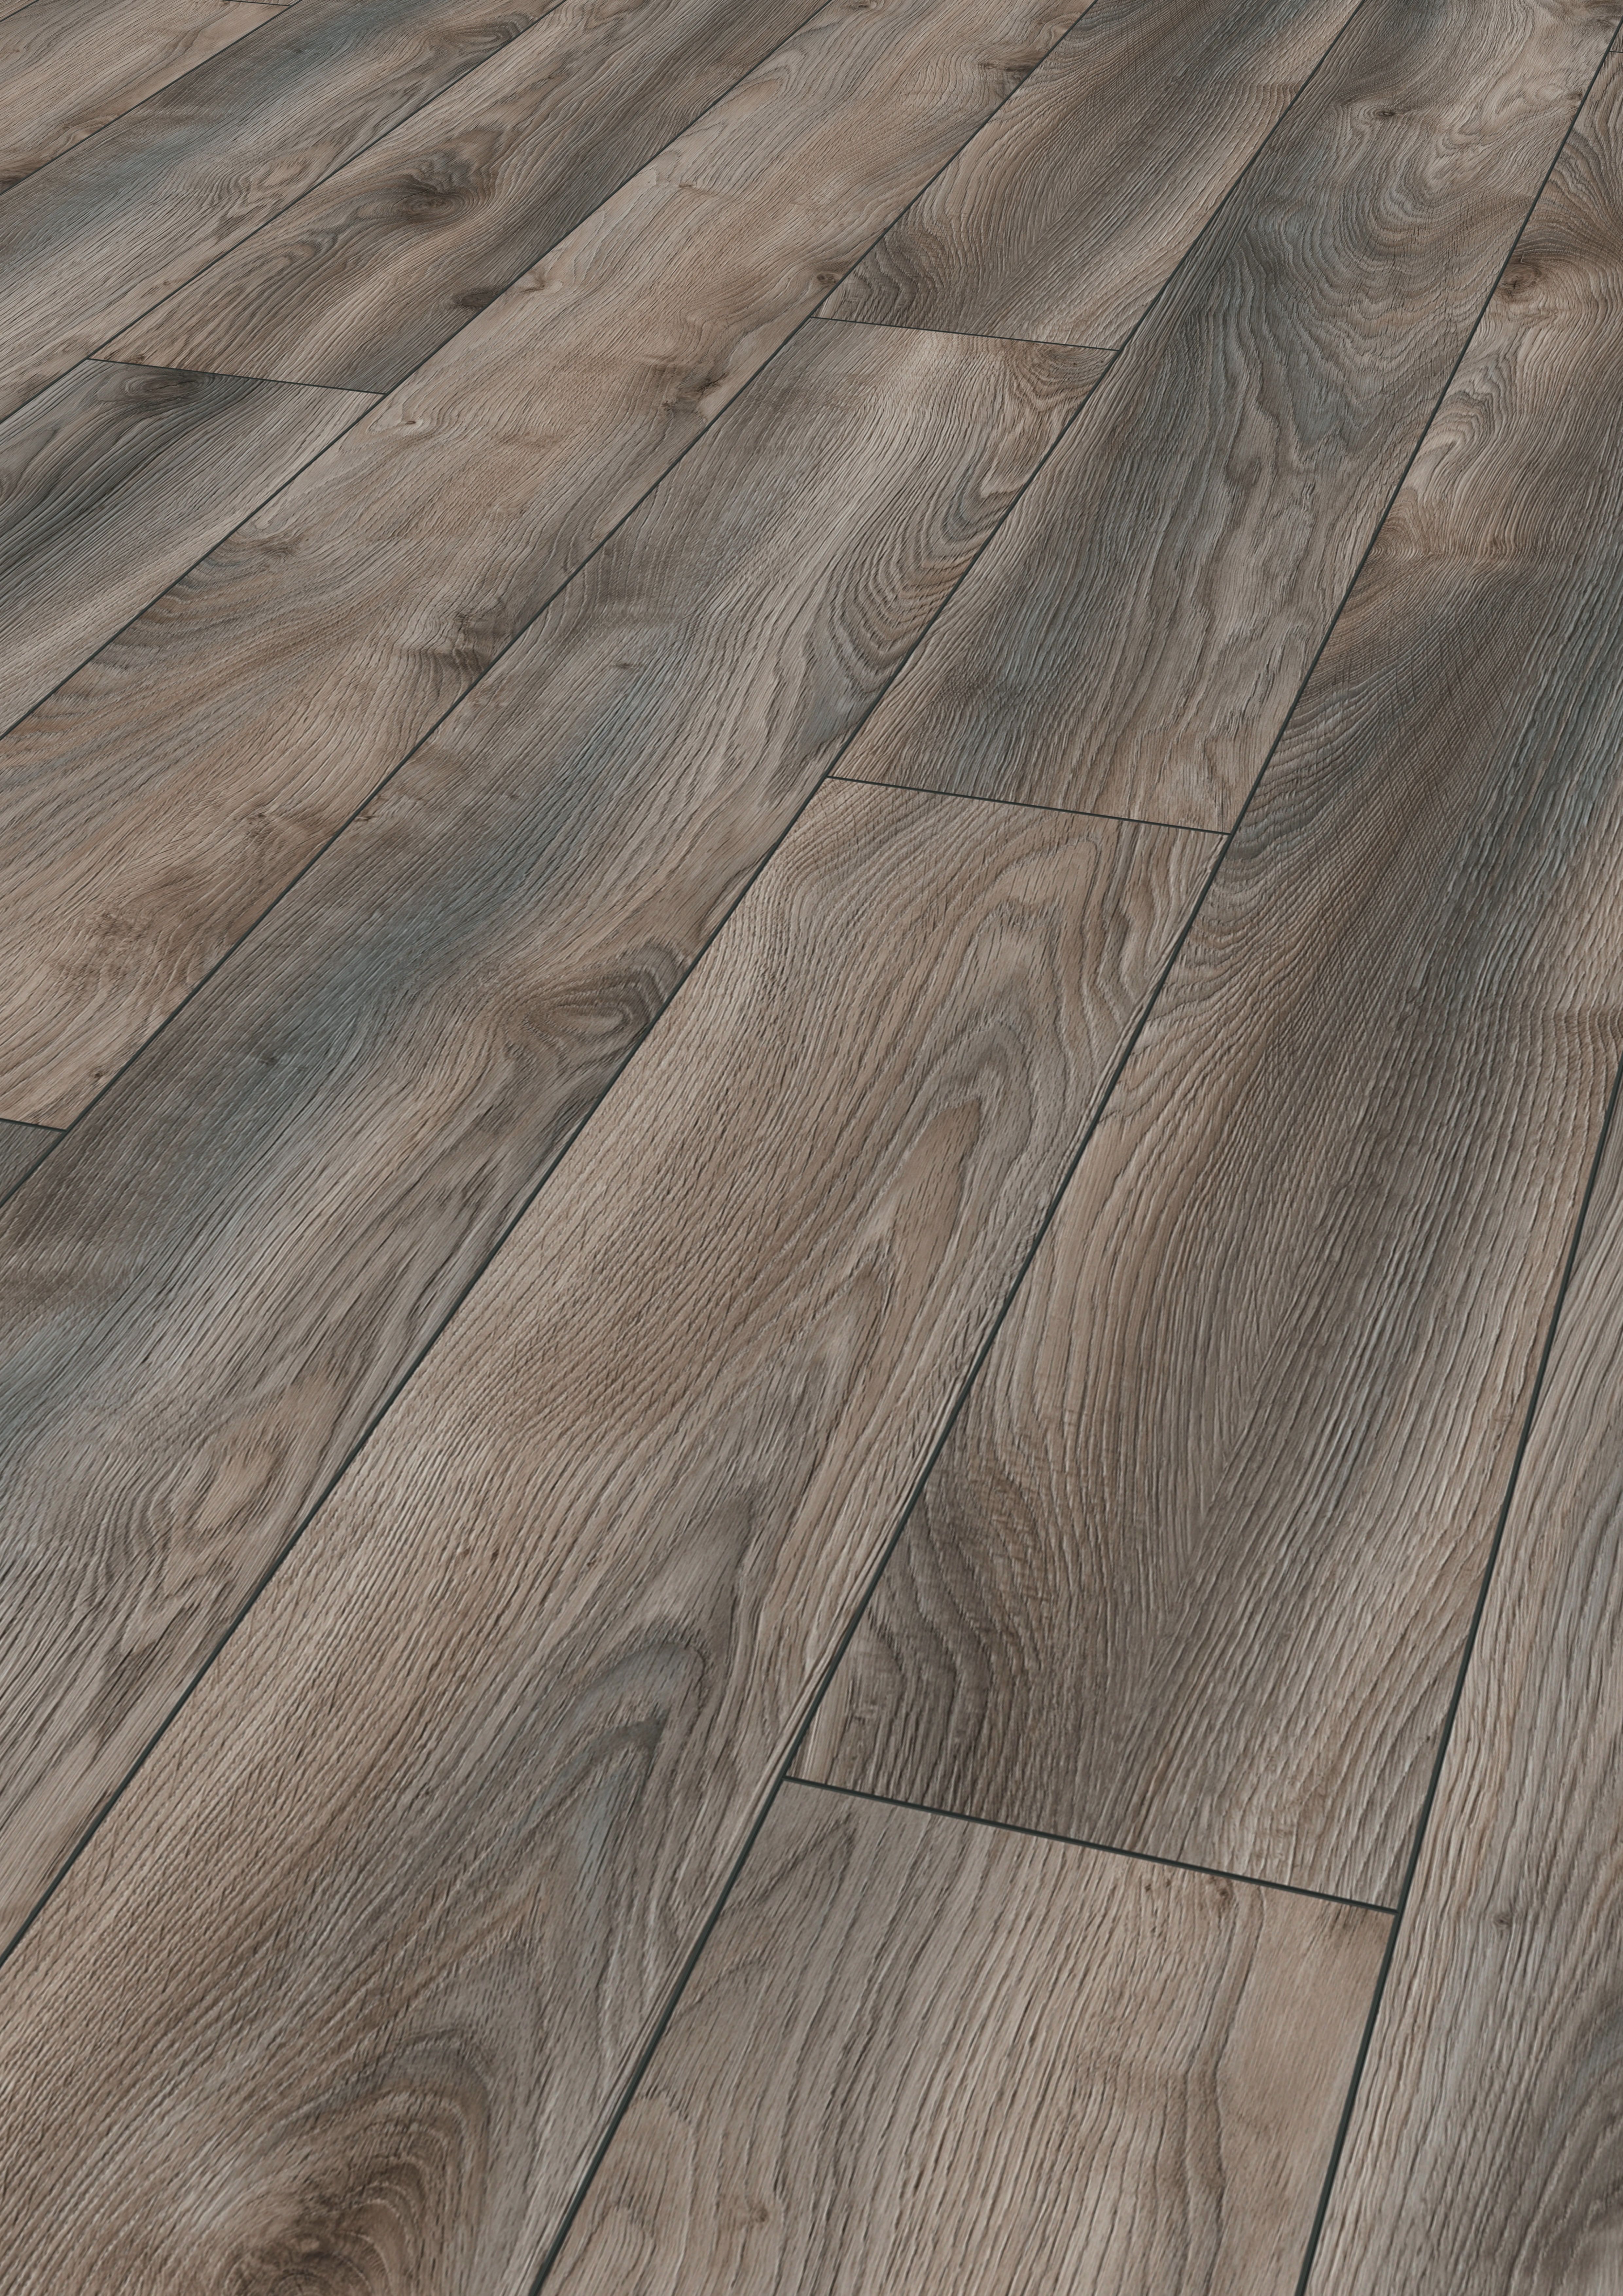 hardwood flooring sale ottawa of mammut laminate flooring in country house plank style kronotex throughout download picture amp